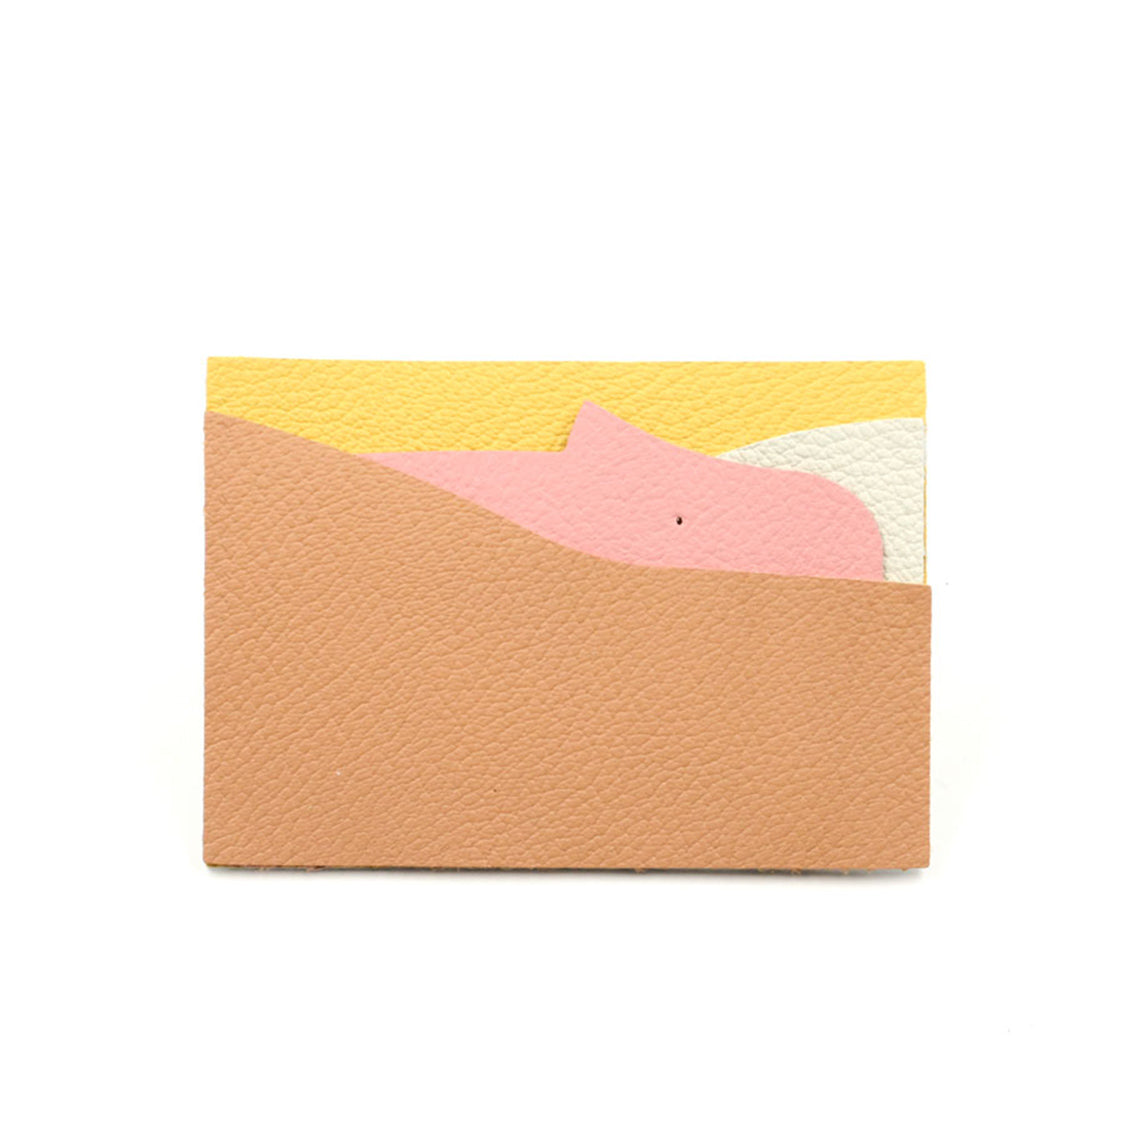 POPSEWING® Top Grain Leather Whale Card Holder DIY Kit